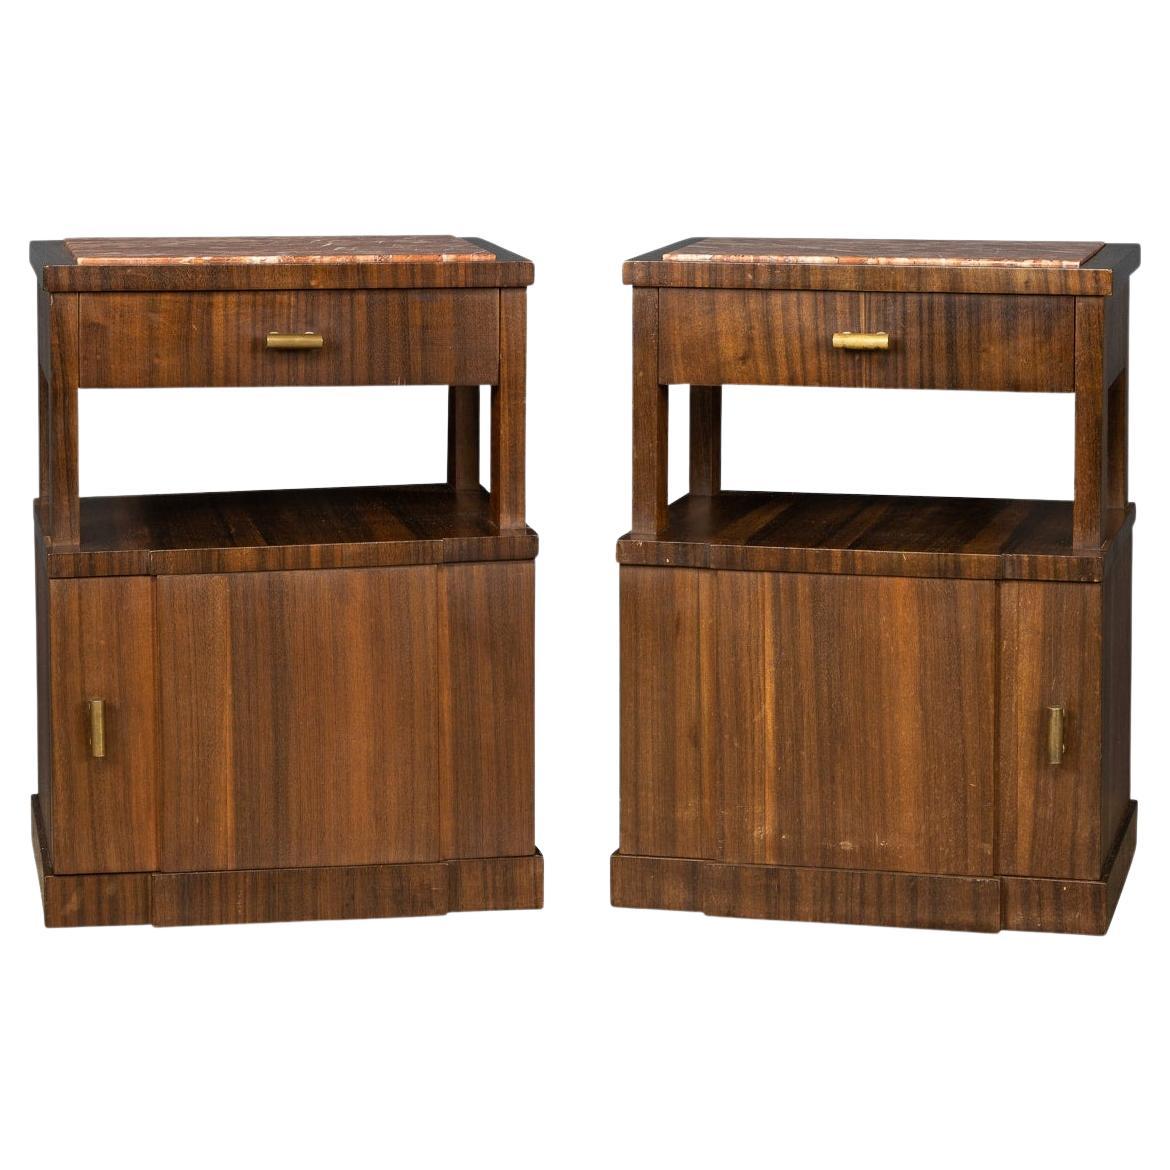 20th Century Italian Pair of Kingwood & Marble Bedside Cabinets, C.1950